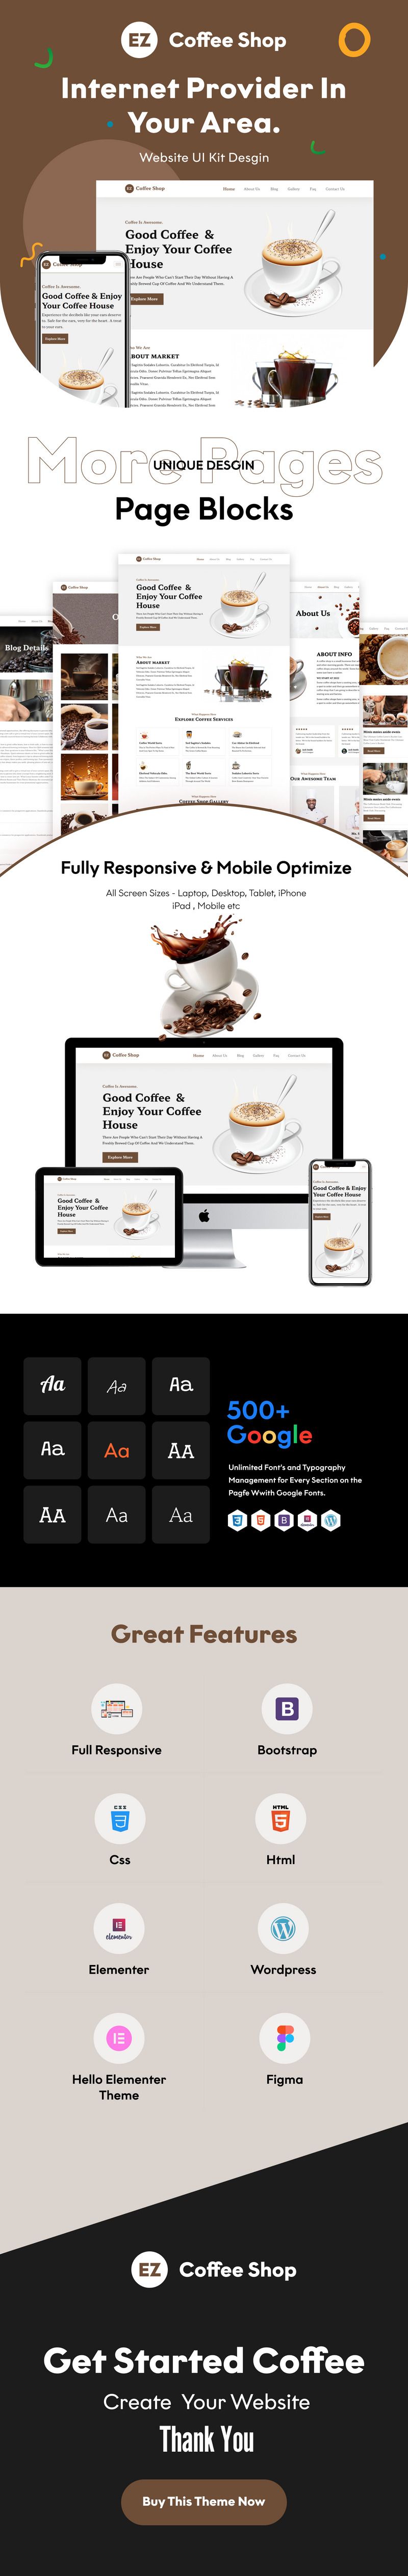 EZ Coffee Shop: Power Up Your Website with Elementor - Features Image 1